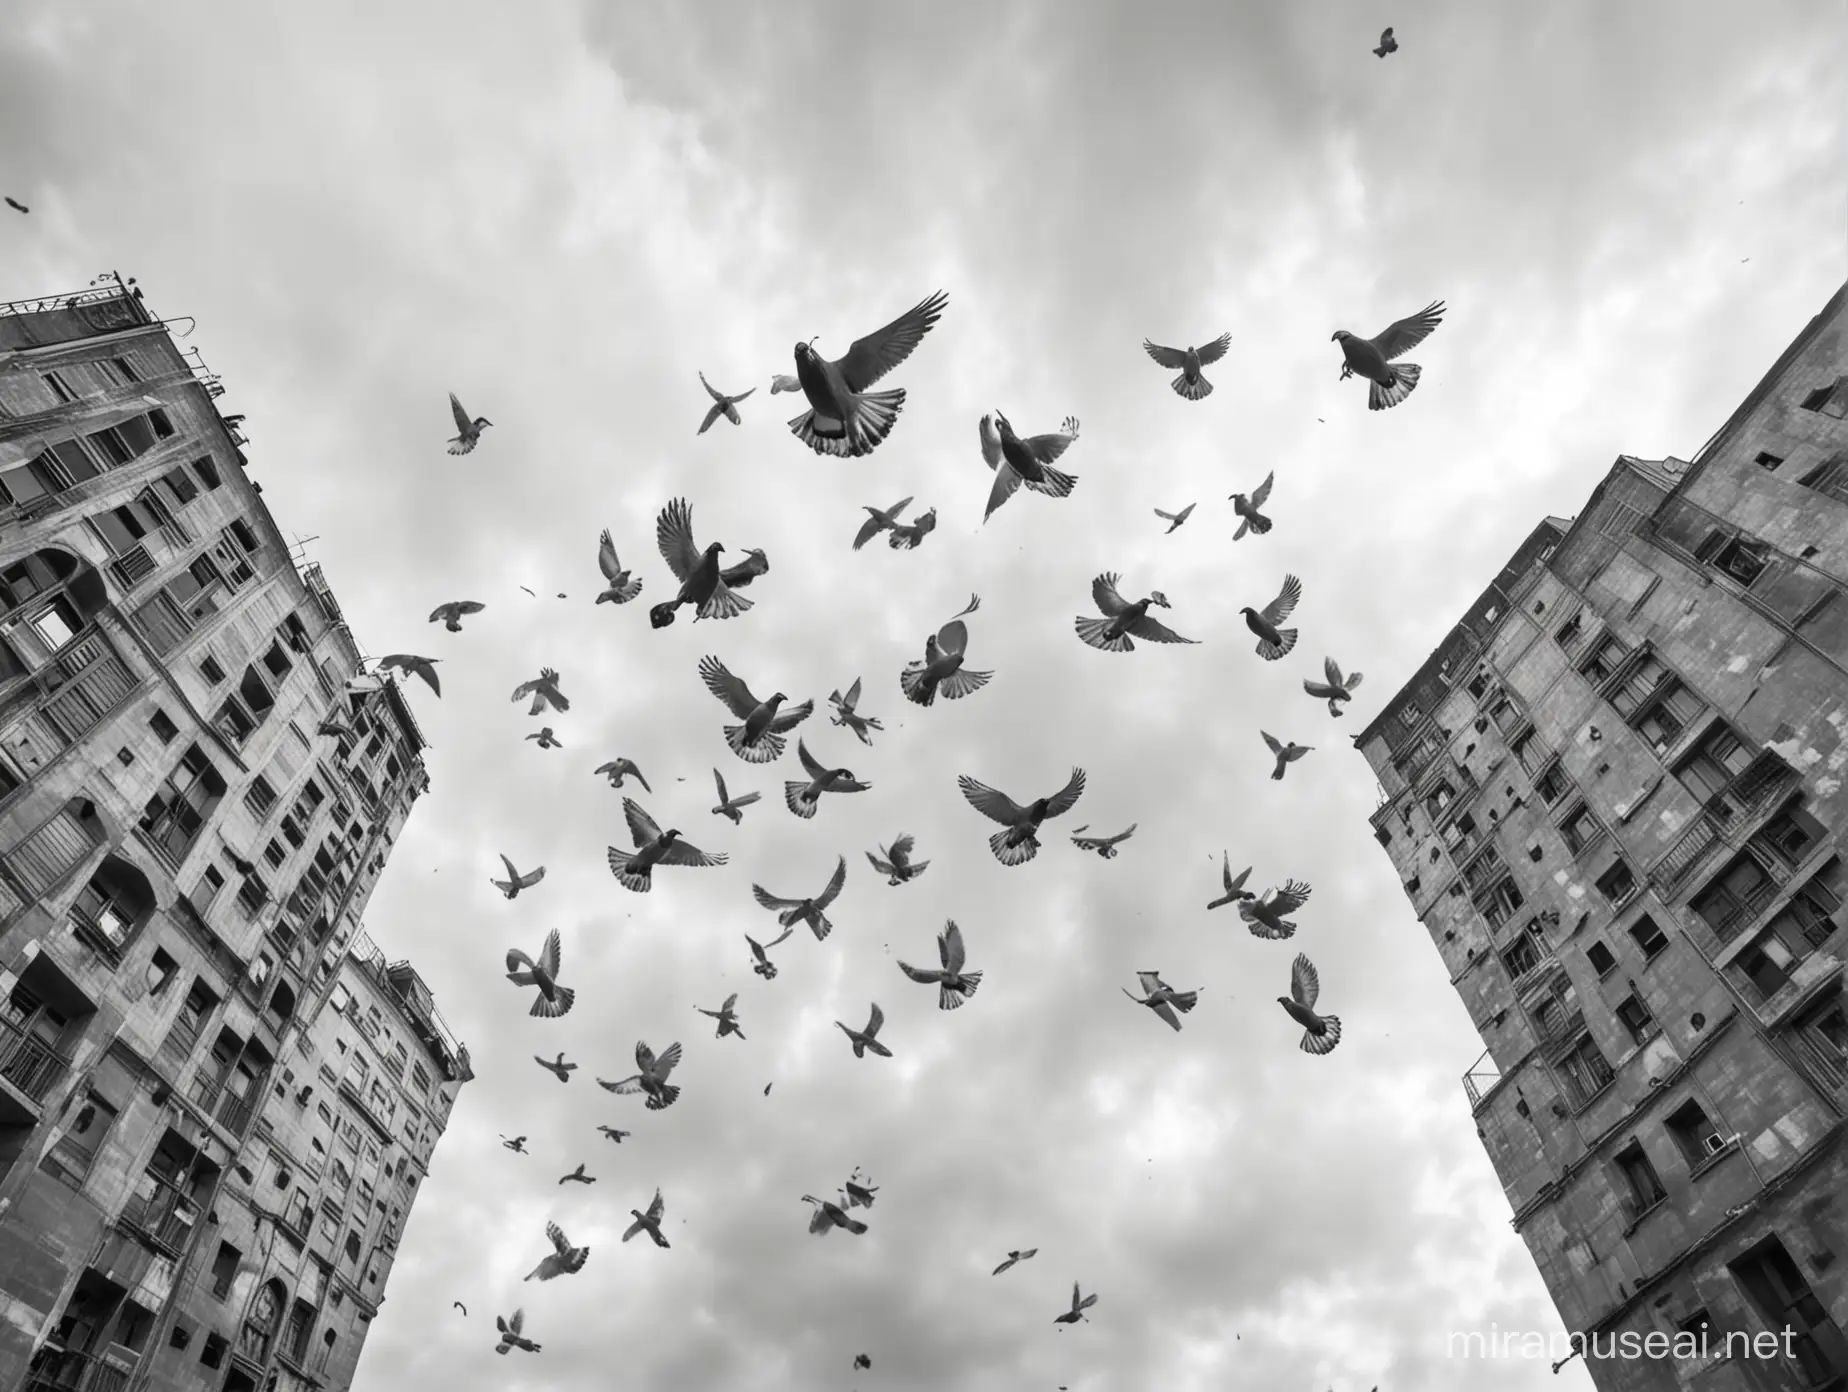 Aerial View of Flying Pigeons Against Clear Monochrome Sky